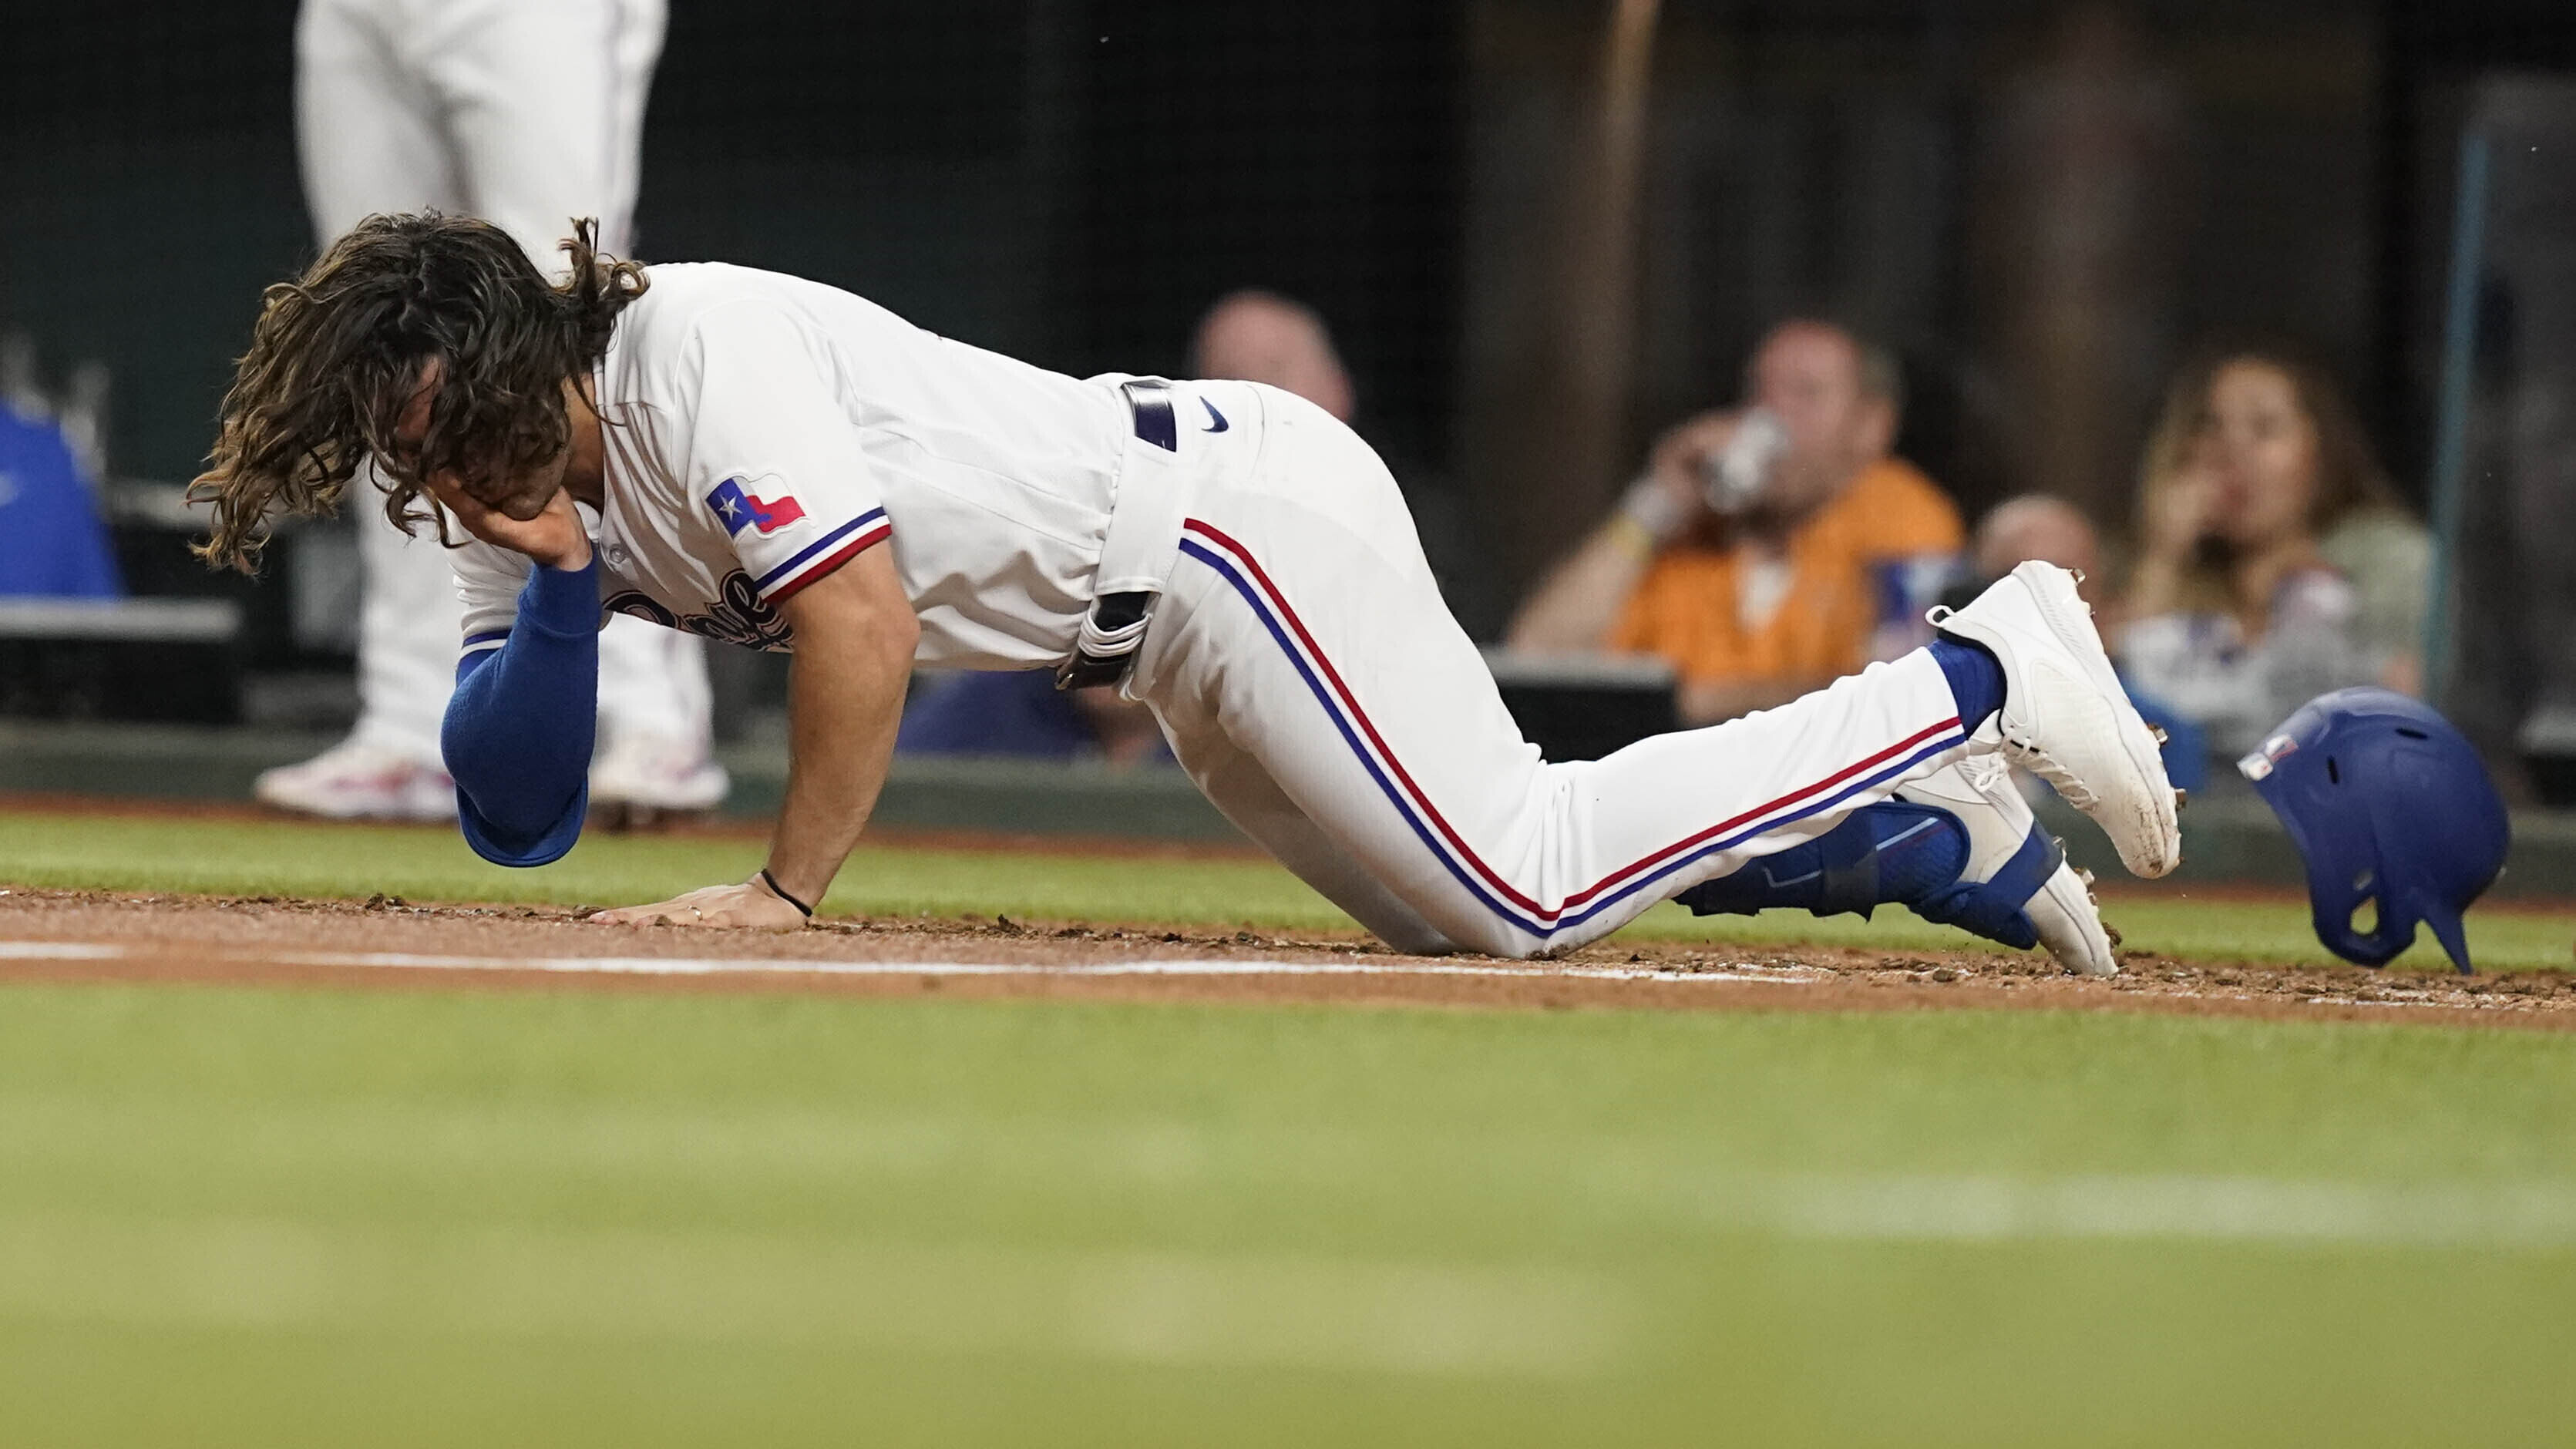 Josh Smith of the Texas Rangers falls after being hit in the face by a pitch during the third inning of a baseball game against the Baltimore Orioles in Arlington, Texas, Monday, April 3, 2023. (AP Photo/LM Otero)